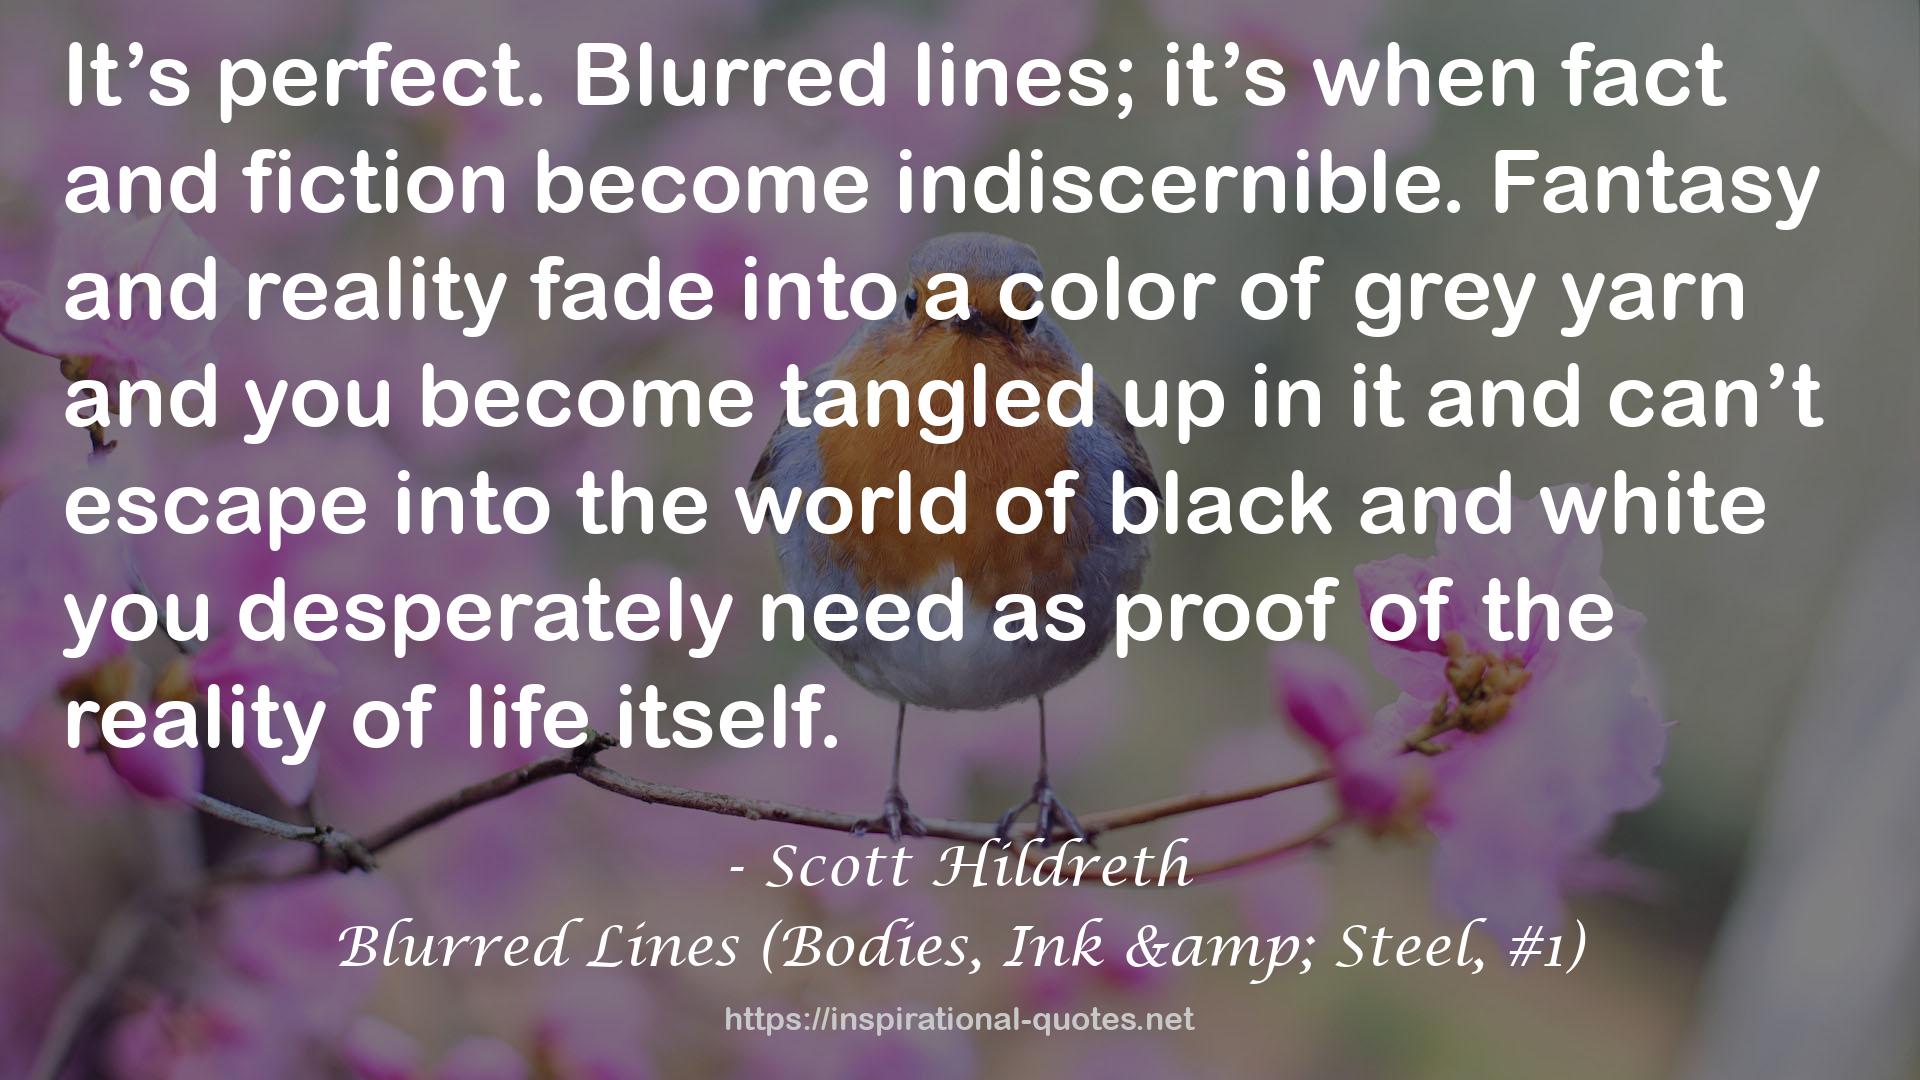 Blurred Lines (Bodies, Ink & Steel, #1) QUOTES